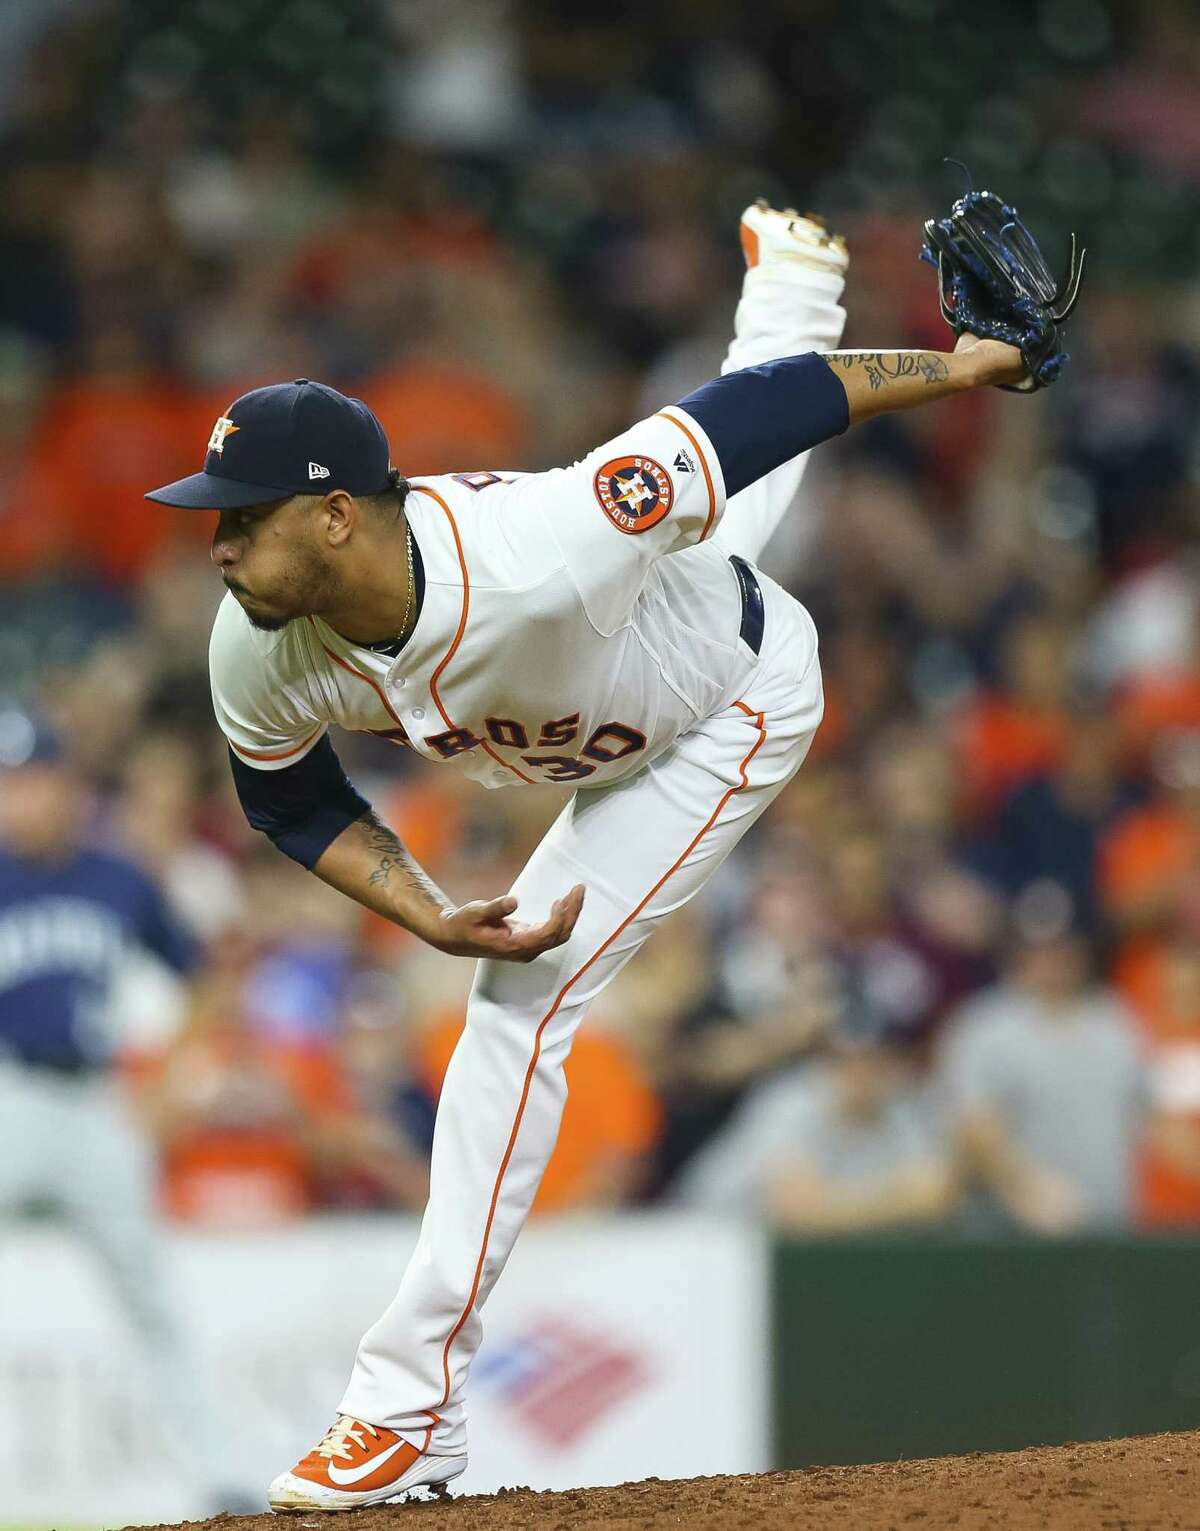 A bargain offseason signee who brought closing experience with the Cubs, Hector Rondon has a 1.50 ERA in 24 innings for the Astros this year and has saved three of their last five wins.